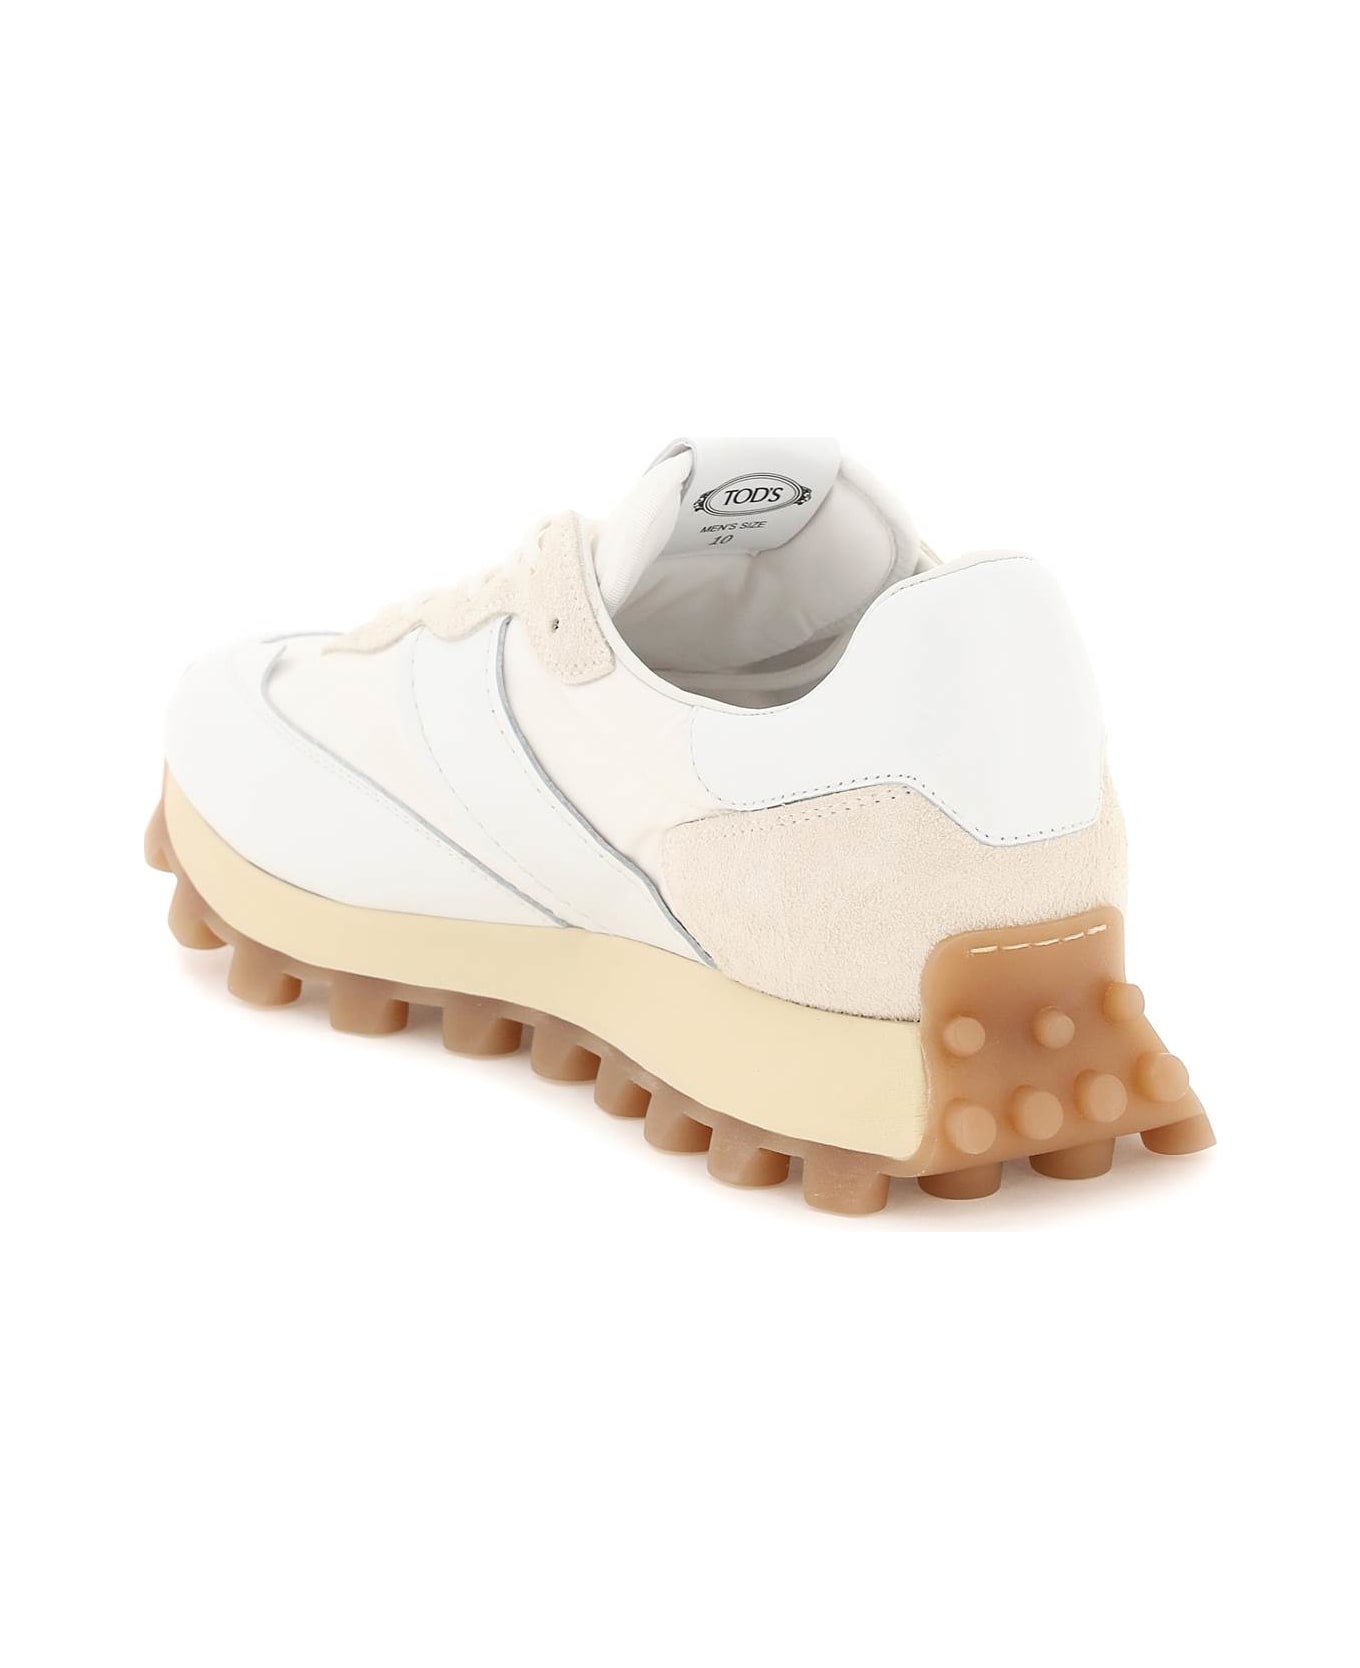 Tod's Sneakers In Smooth Leather And Suede - BIANCO BIANCO LANA